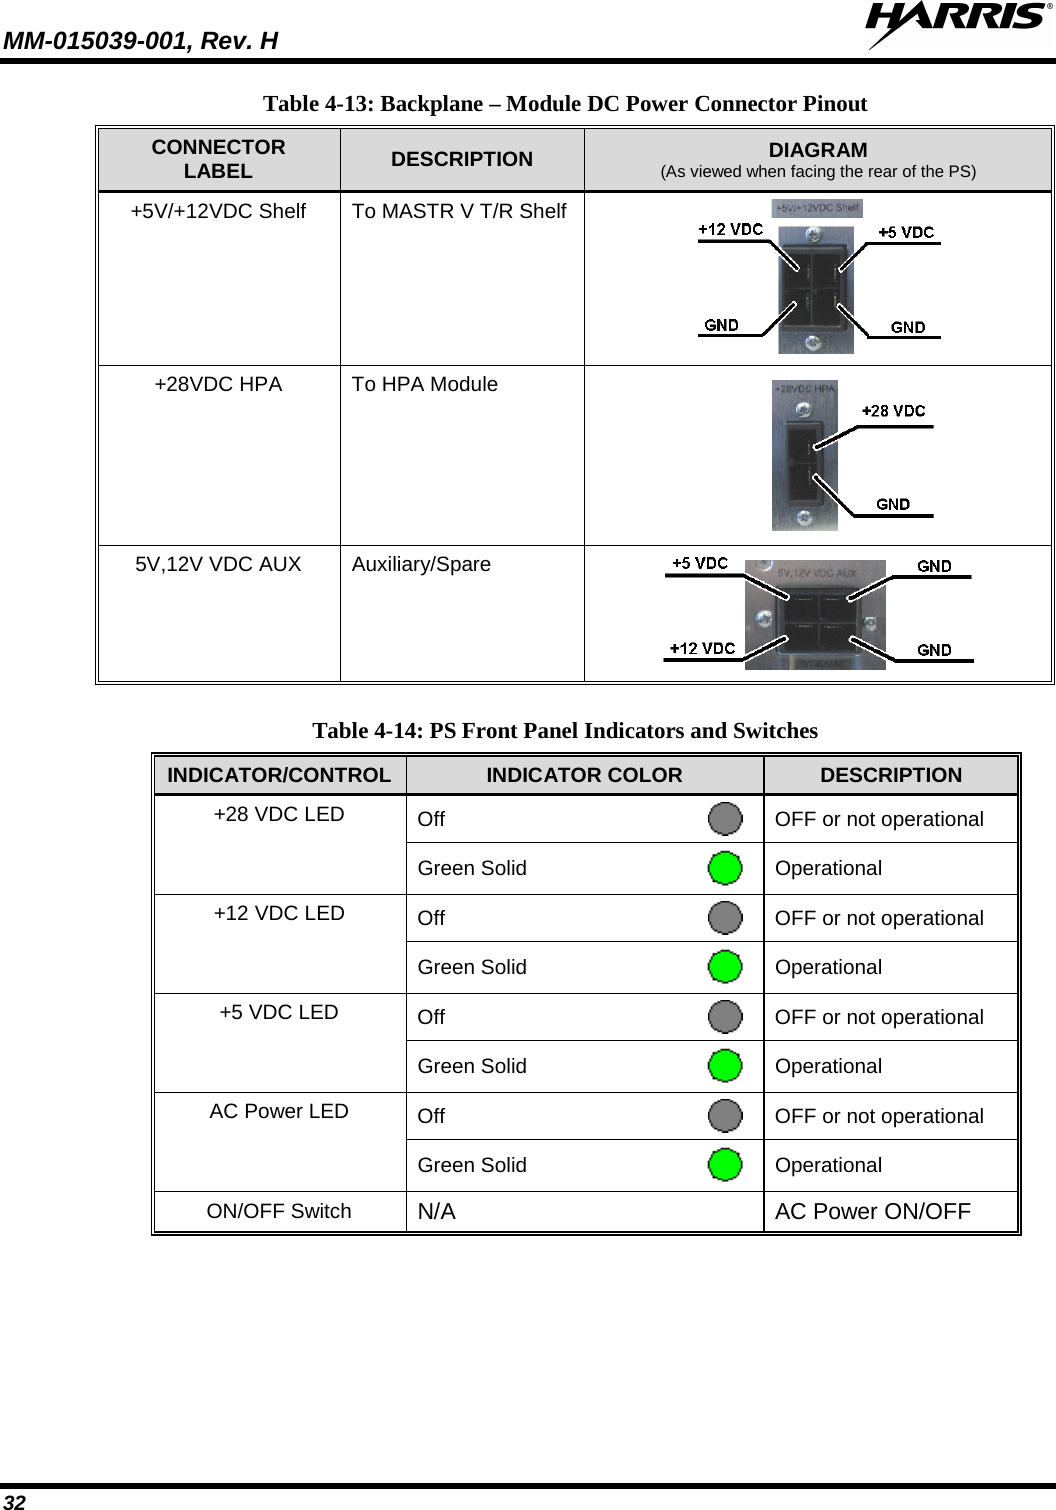 MM-015039-001, Rev. H     32 Table 4-13: Backplane – Module DC Power Connector Pinout CONNECTOR LABEL DESCRIPTION DIAGRAM (As viewed when facing the rear of the PS) +5V/+12VDC Shelf To MASTR V T/R Shelf  +28VDC HPA To HPA Module                                5V,12V VDC AUX Auxiliary/Spare   Table 4-14: PS Front Panel Indicators and Switches INDICATOR/CONTROL INDICATOR COLOR DESCRIPTION +28 VDC LED Off  OFF or not operational Green Solid  Operational +12 VDC LED Off  OFF or not operational Green Solid  Operational +5 VDC LED Off  OFF or not operational Green Solid  Operational AC Power LED Off  OFF or not operational Green Solid  Operational ON/OFF Switch N/A  AC Power ON/OFF     